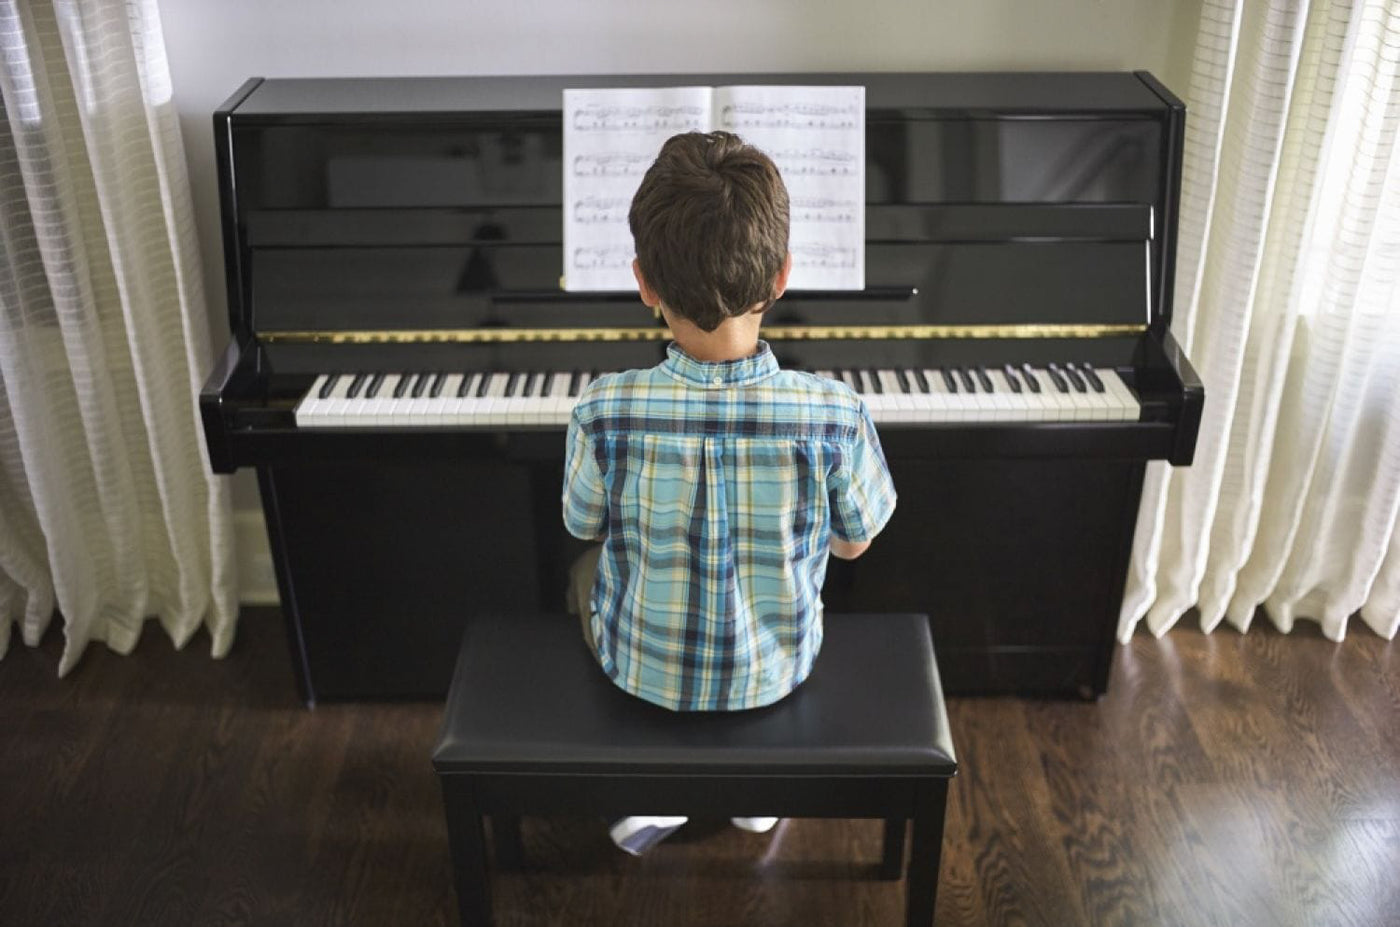 Young student sitting at an upright piano, ready to play a piece of music from the sheet music on the stand.